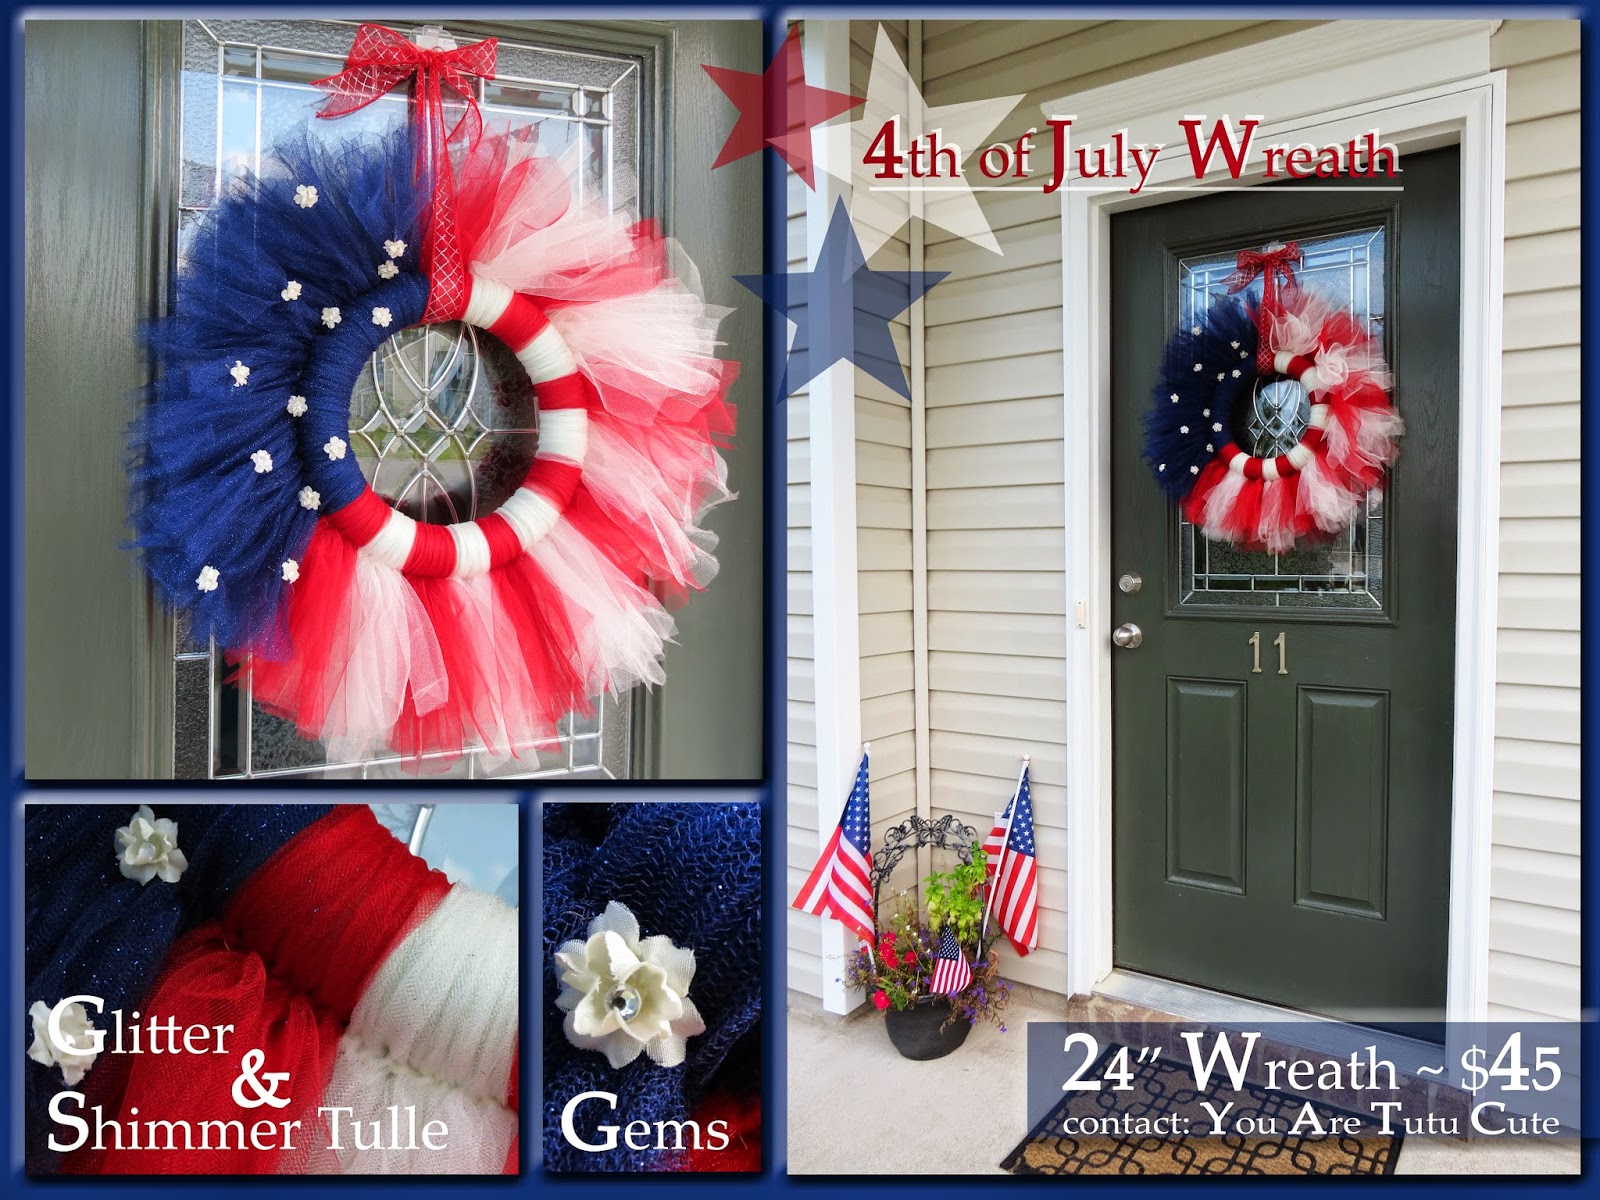 https://www.etsy.com/listing/194480548/24-patriotic-red-white-and-blue-door?ref=shop_home_feat_2